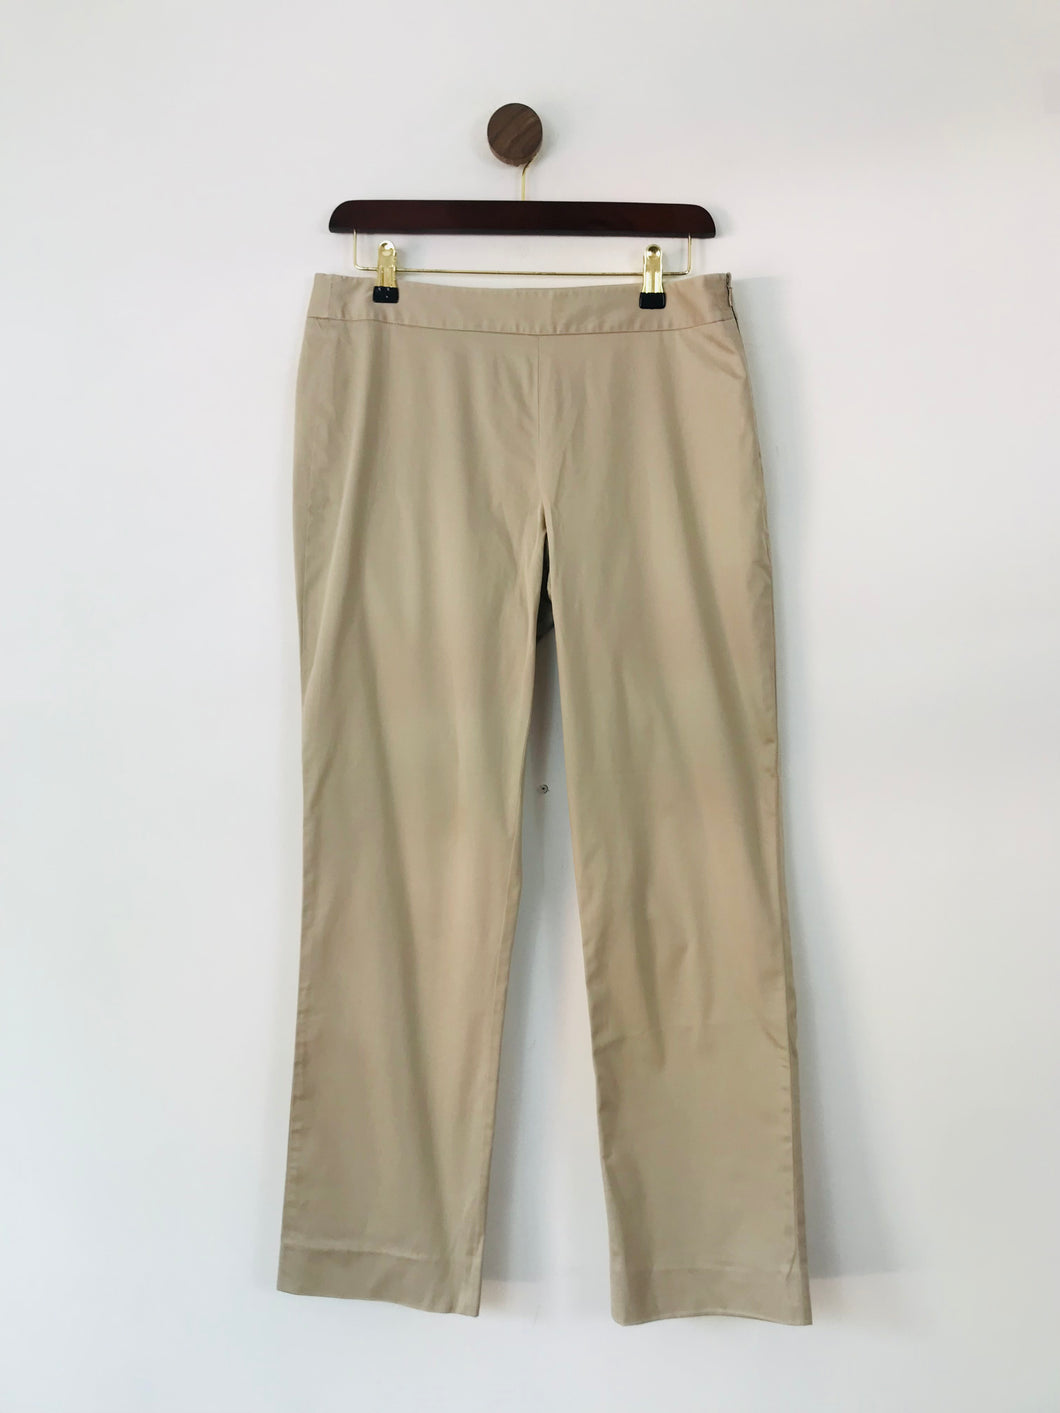 DKNY Women's Perry Chinos Trousers | US8 UK12 | Beige